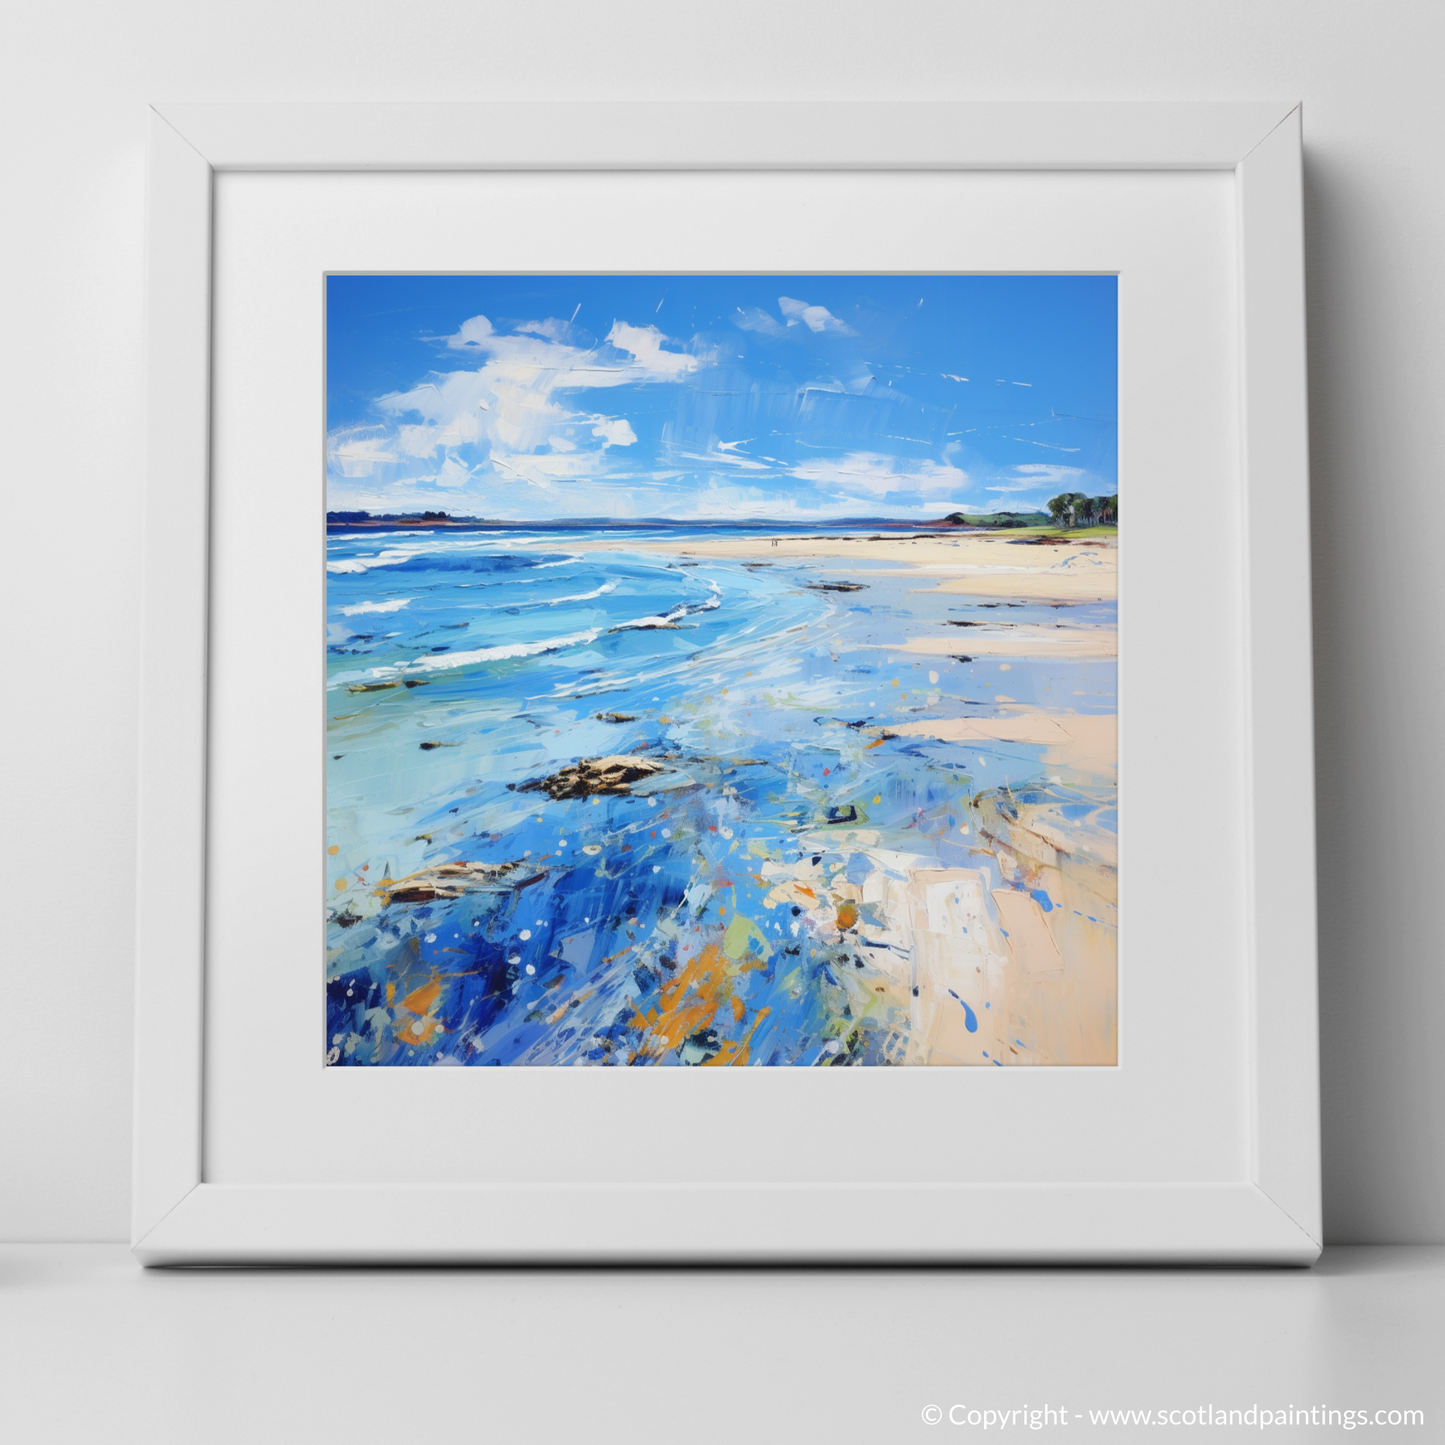 Art Print of Longniddry Beach, East Lothian in summer with a white frame